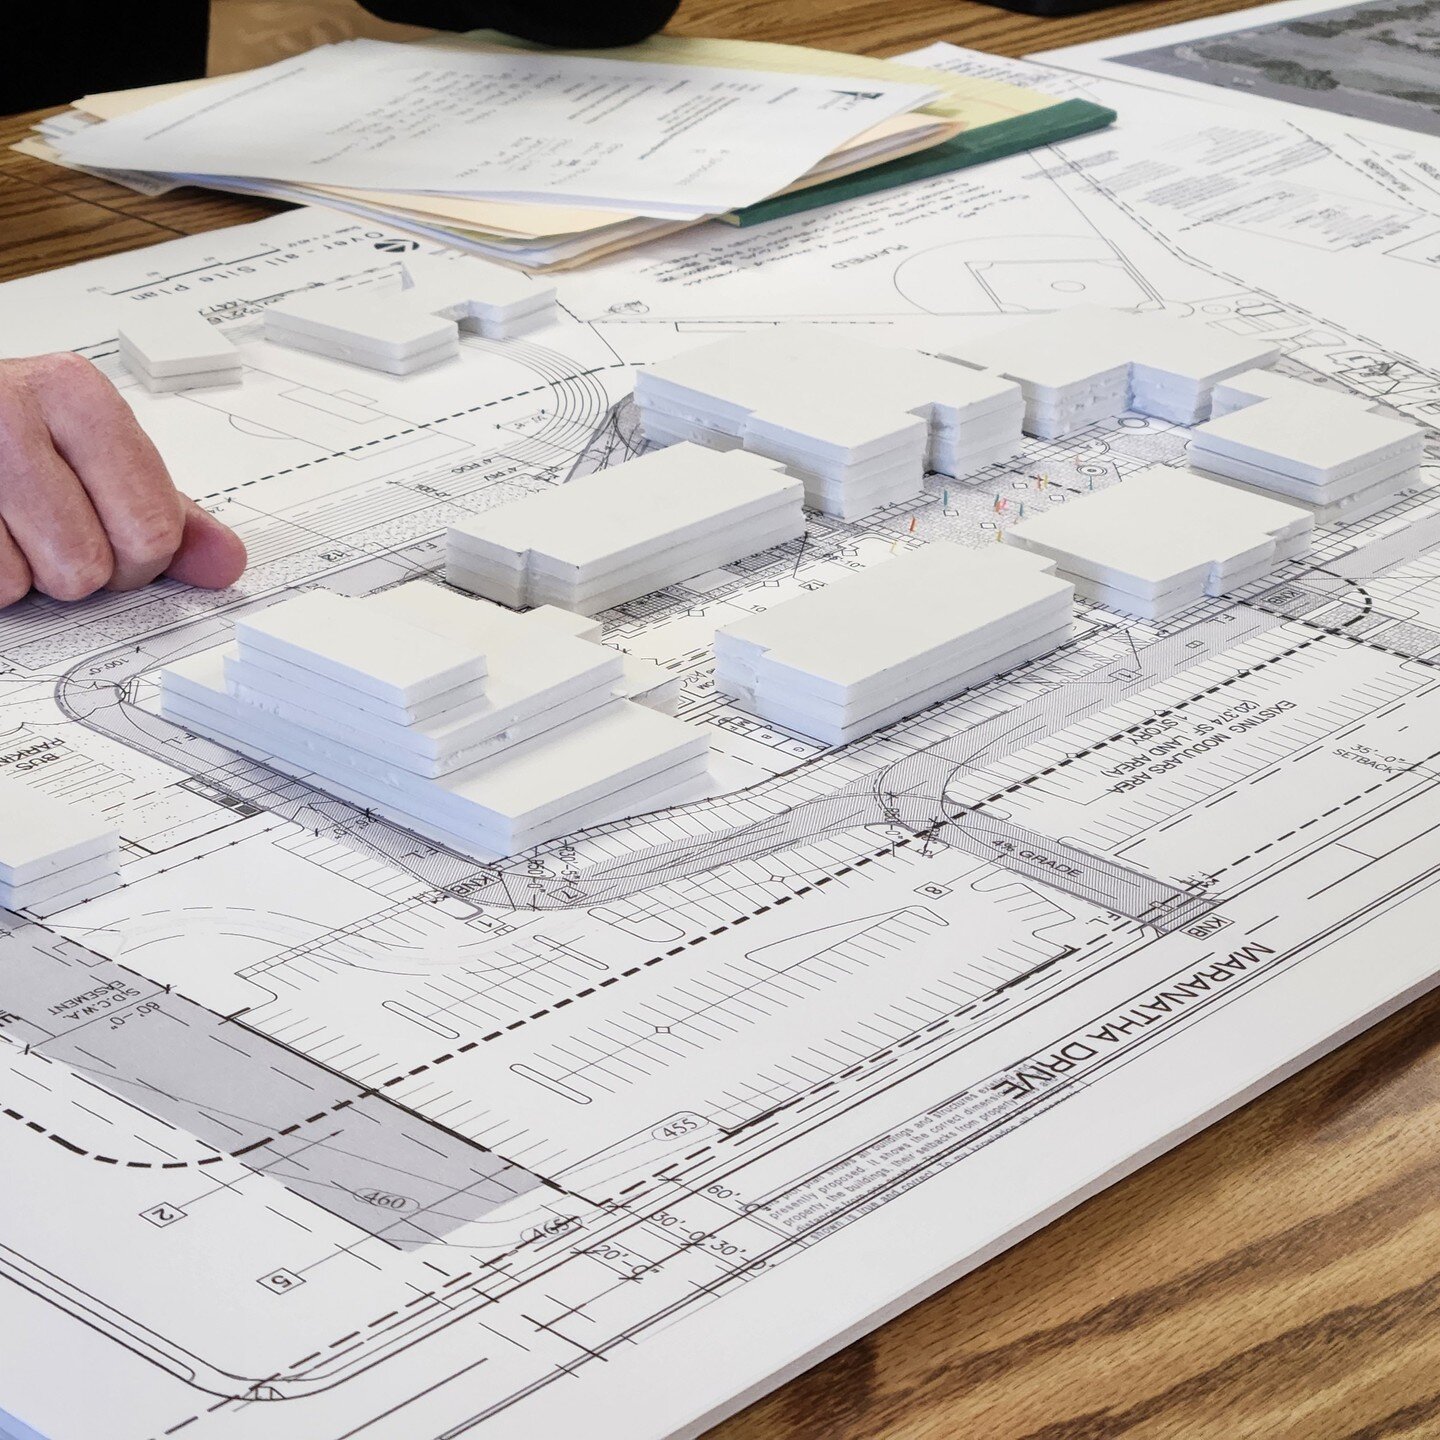 Massing models really help visualize the scale of a project on a site. We recently had a workshop with a local school to work out some #design options. This is part of our commitment to the #education sector. In fact, a part of our team is currently 